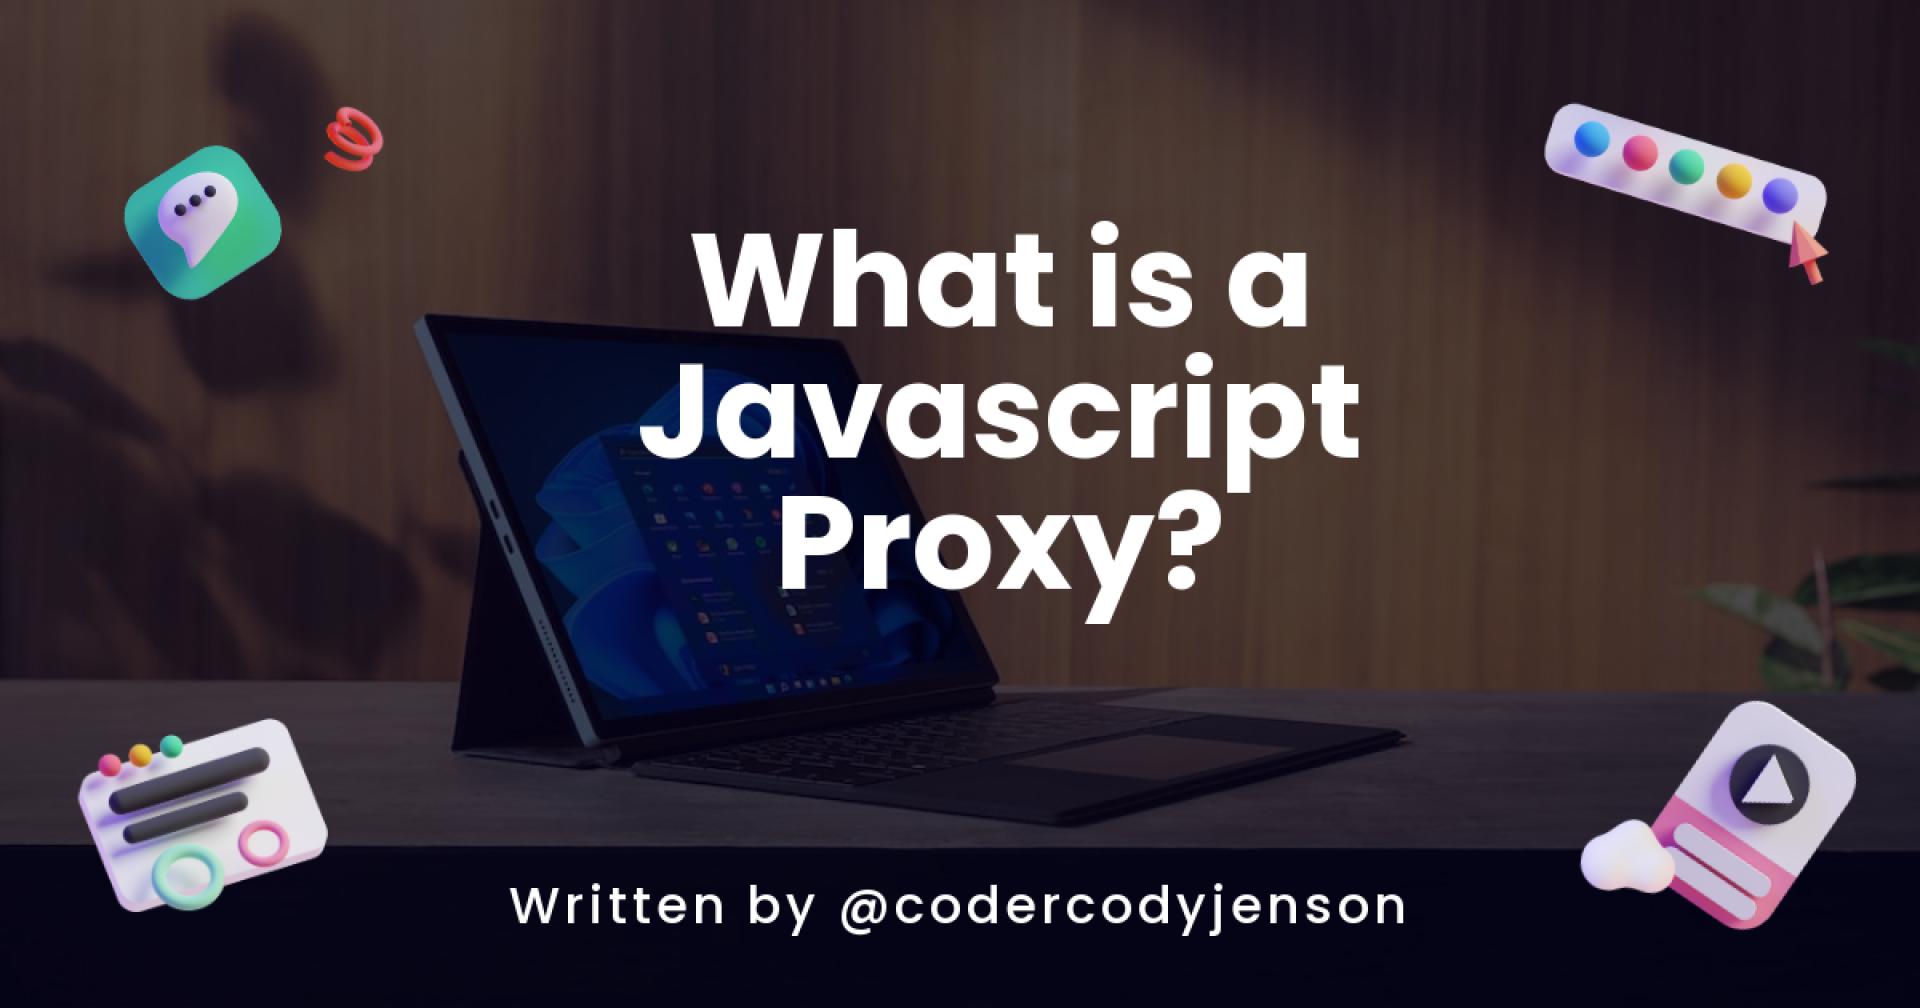 What is a Javascript Proxy?